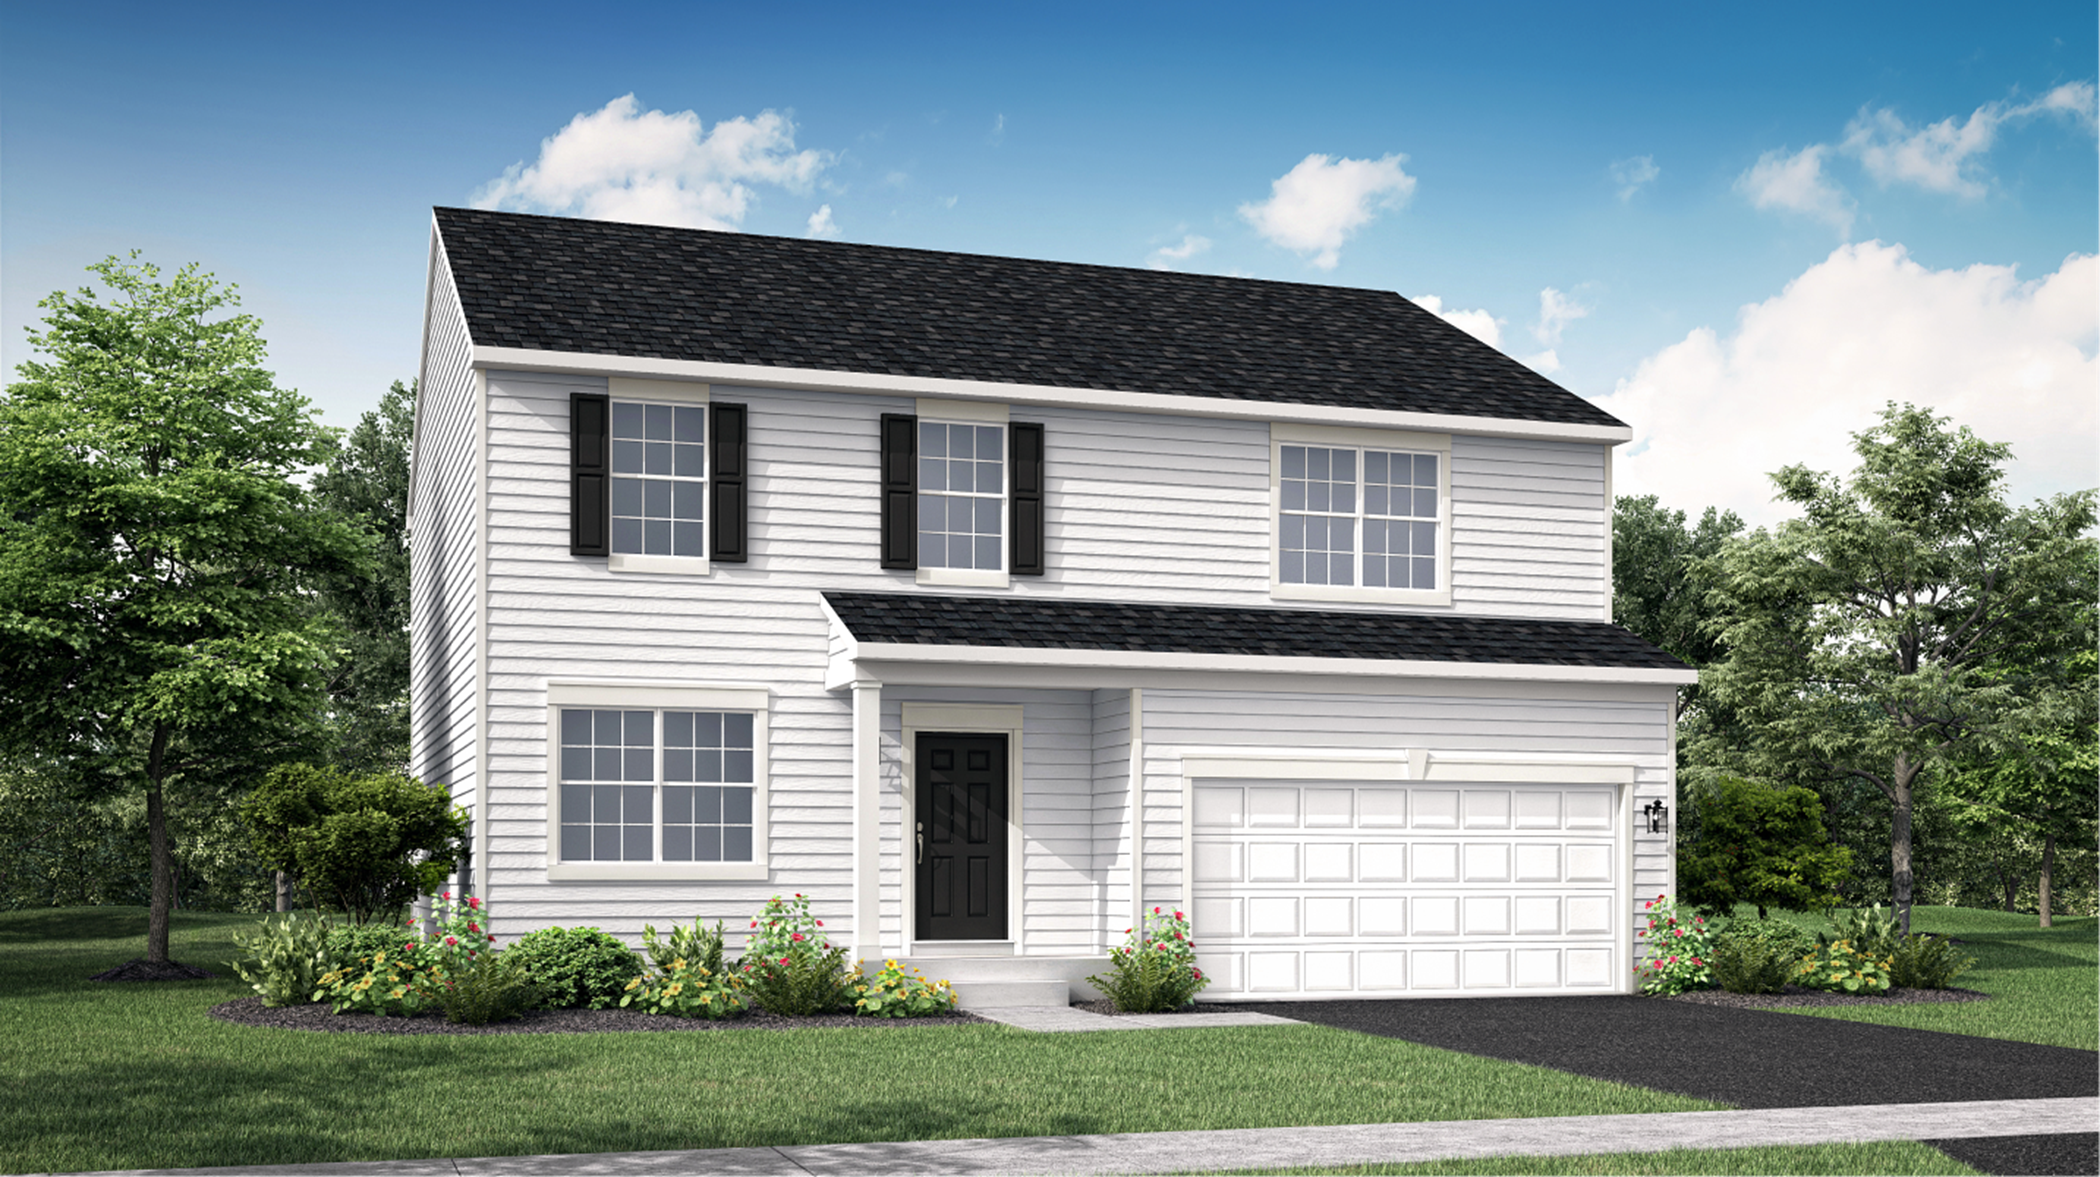 Townsend exterior rendering A